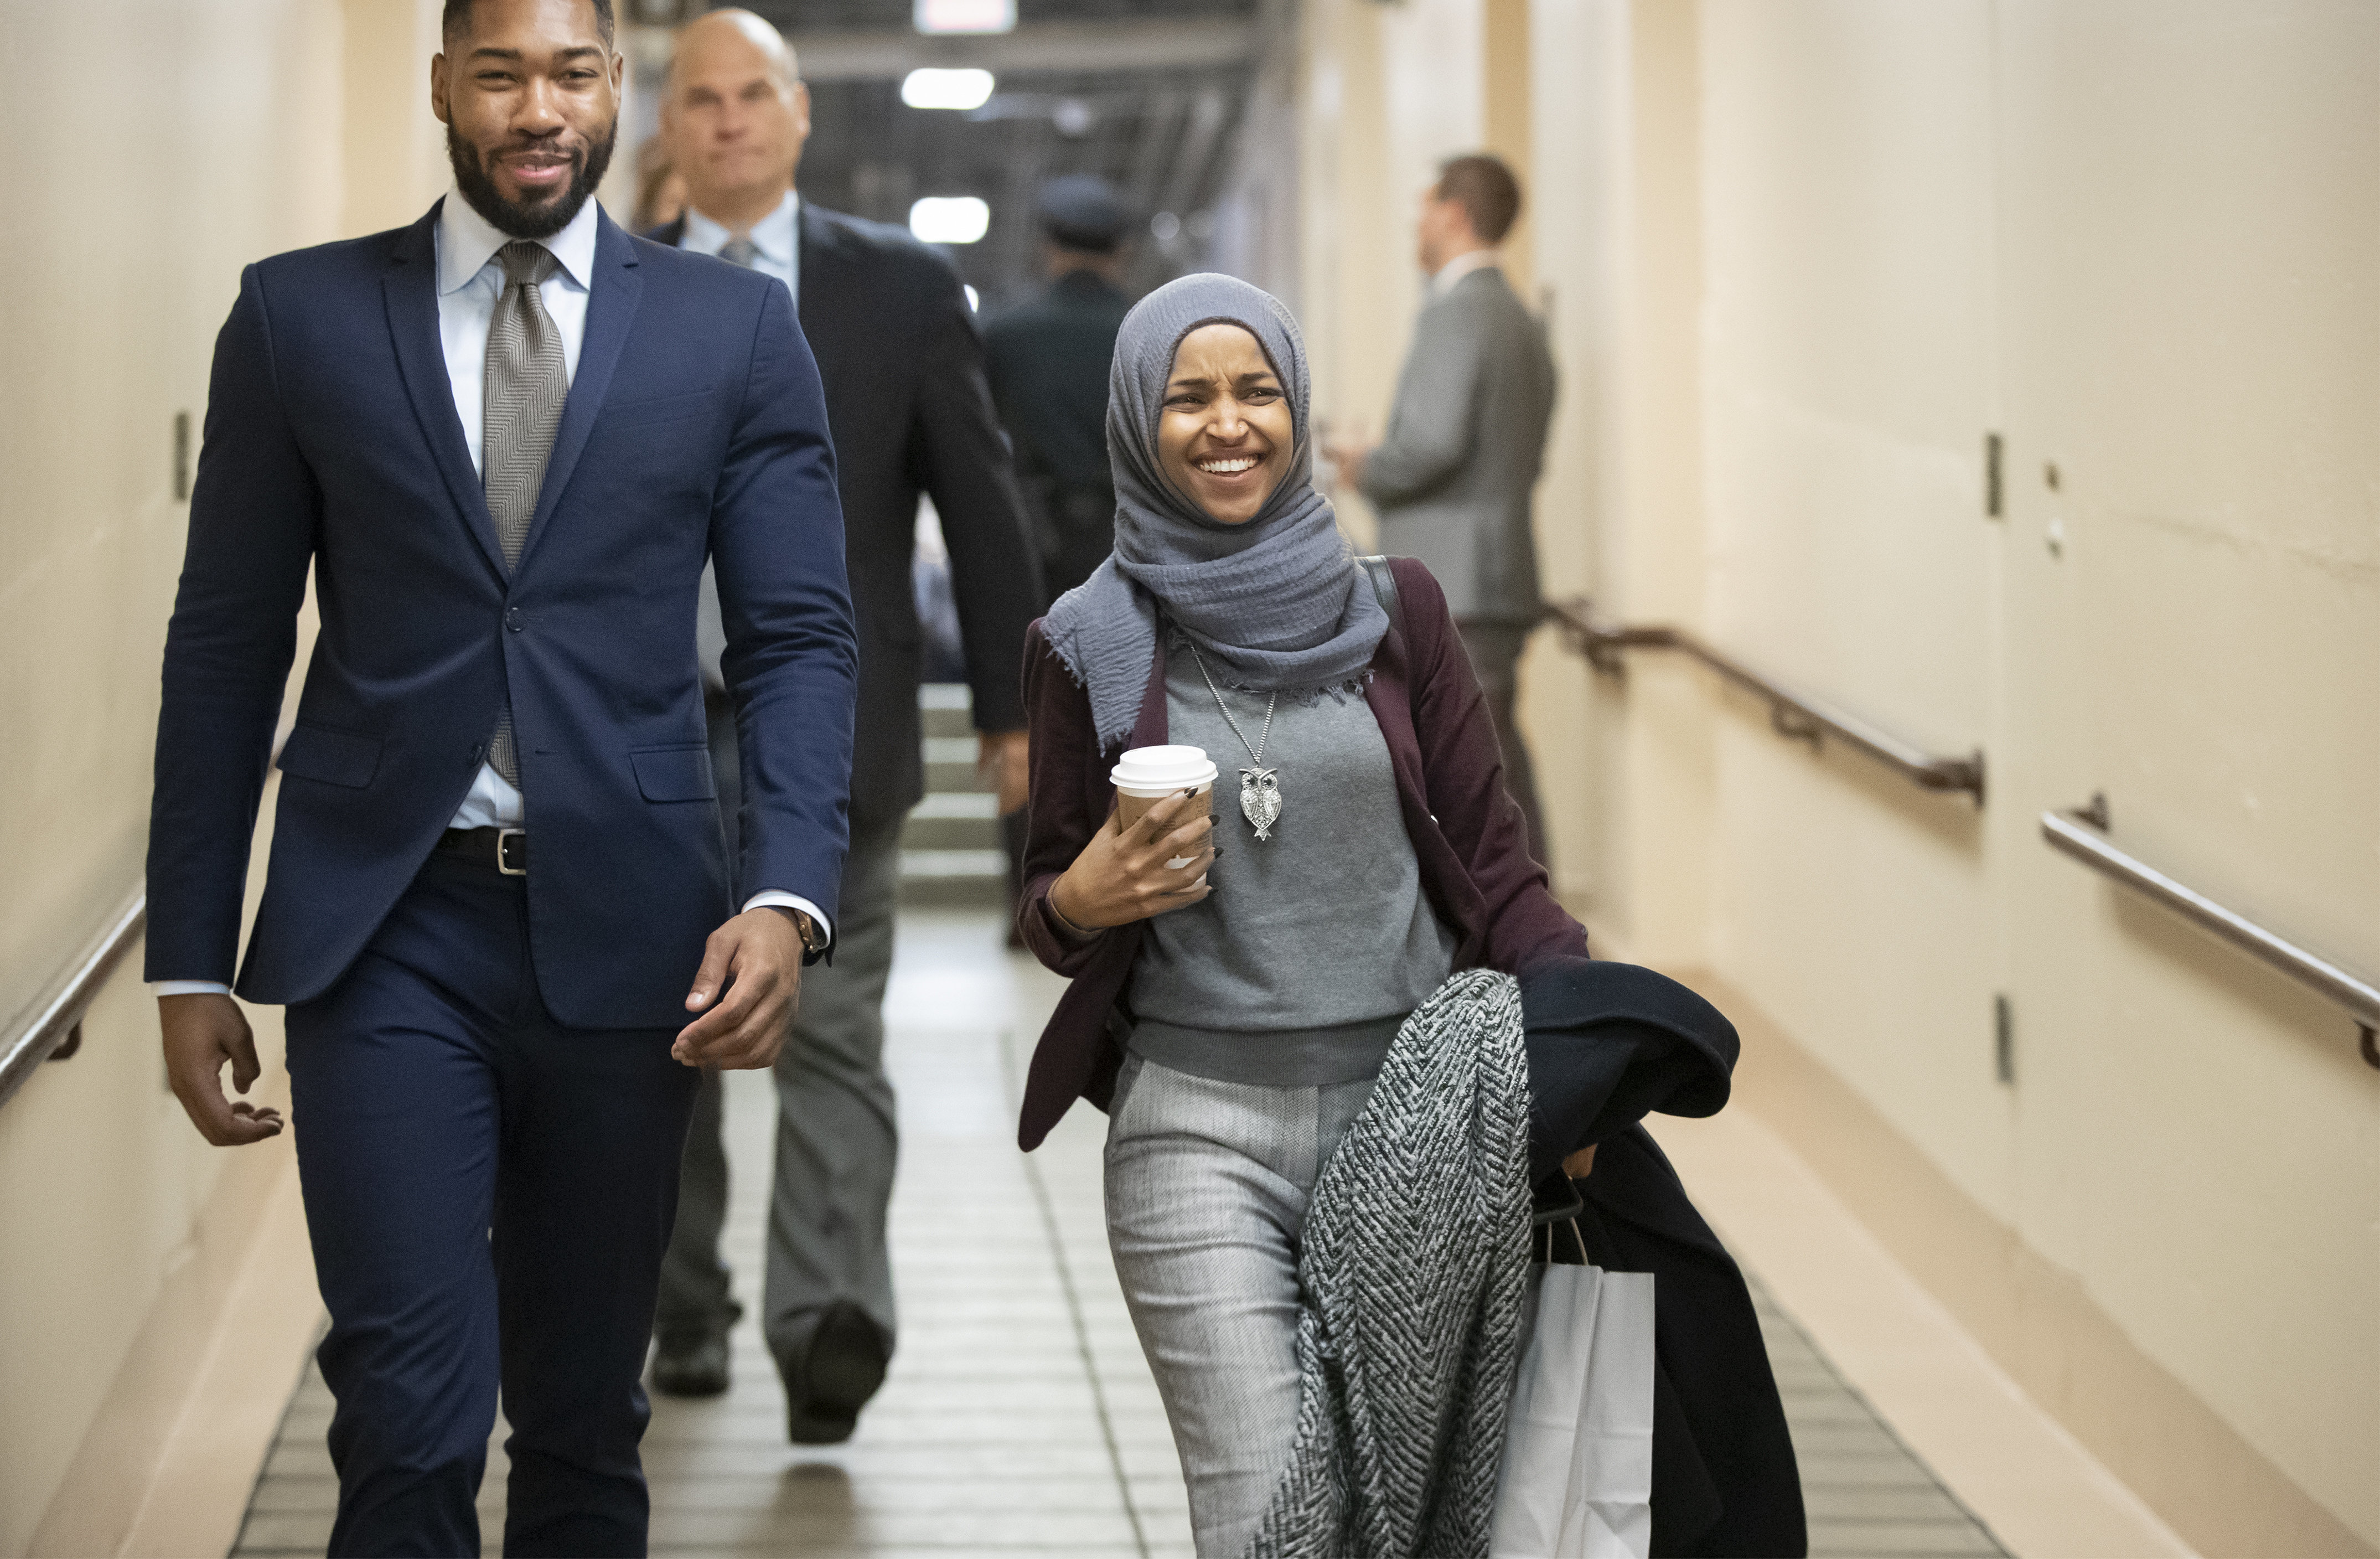 Rep.-Elect Ilhan Omar Says She'll Work To Lift Ban On Religious Headwear In Congress